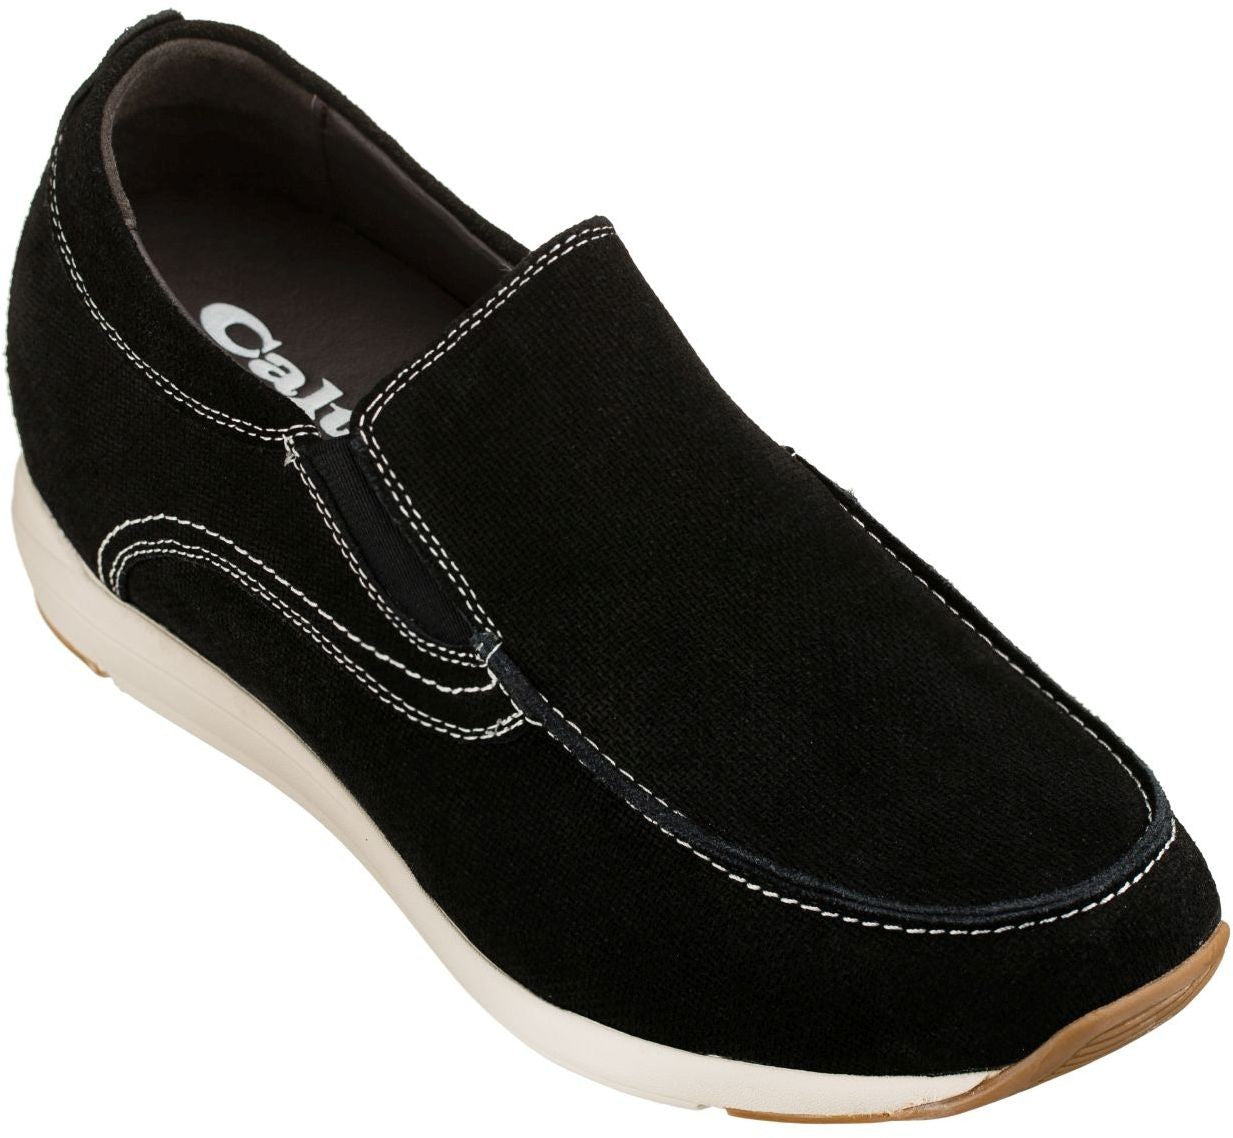 Elevator shoes height increase CALTO - G4903 - 2.8 Inches Taller (Nubuck Black) - Super Lightweight